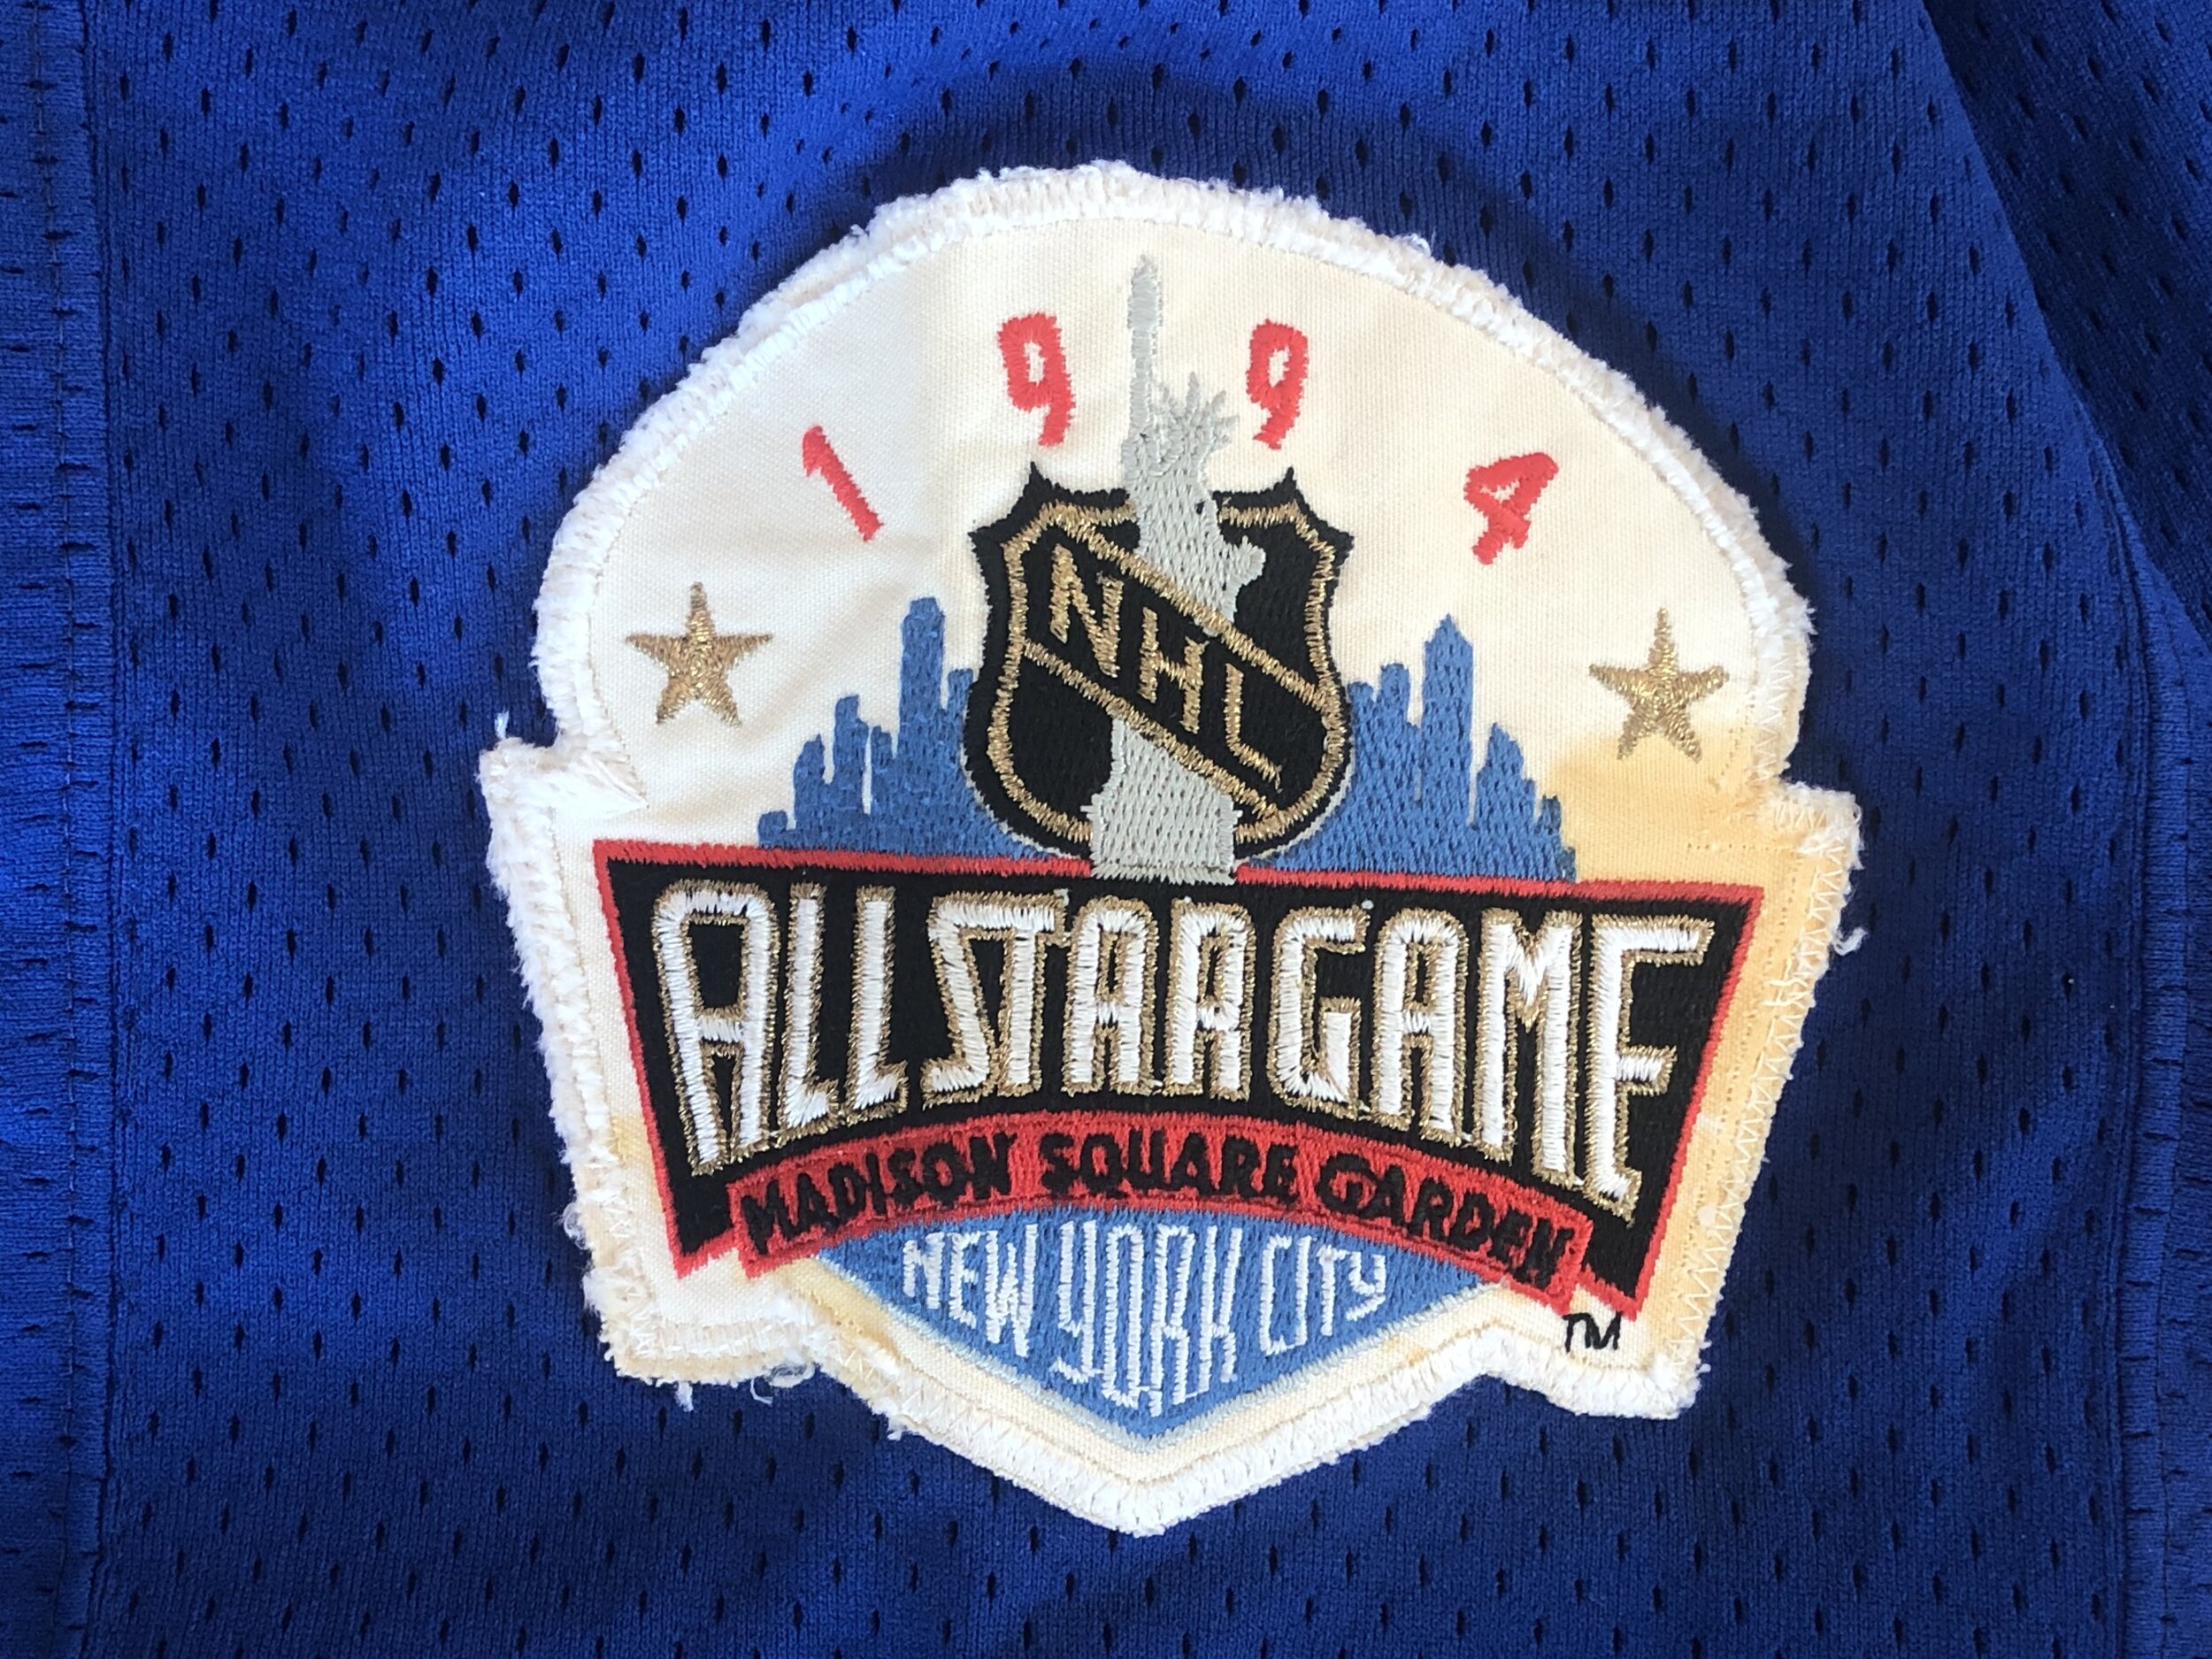  1994 NHL Stanley Cup Jersey Patch New York Rangers vs